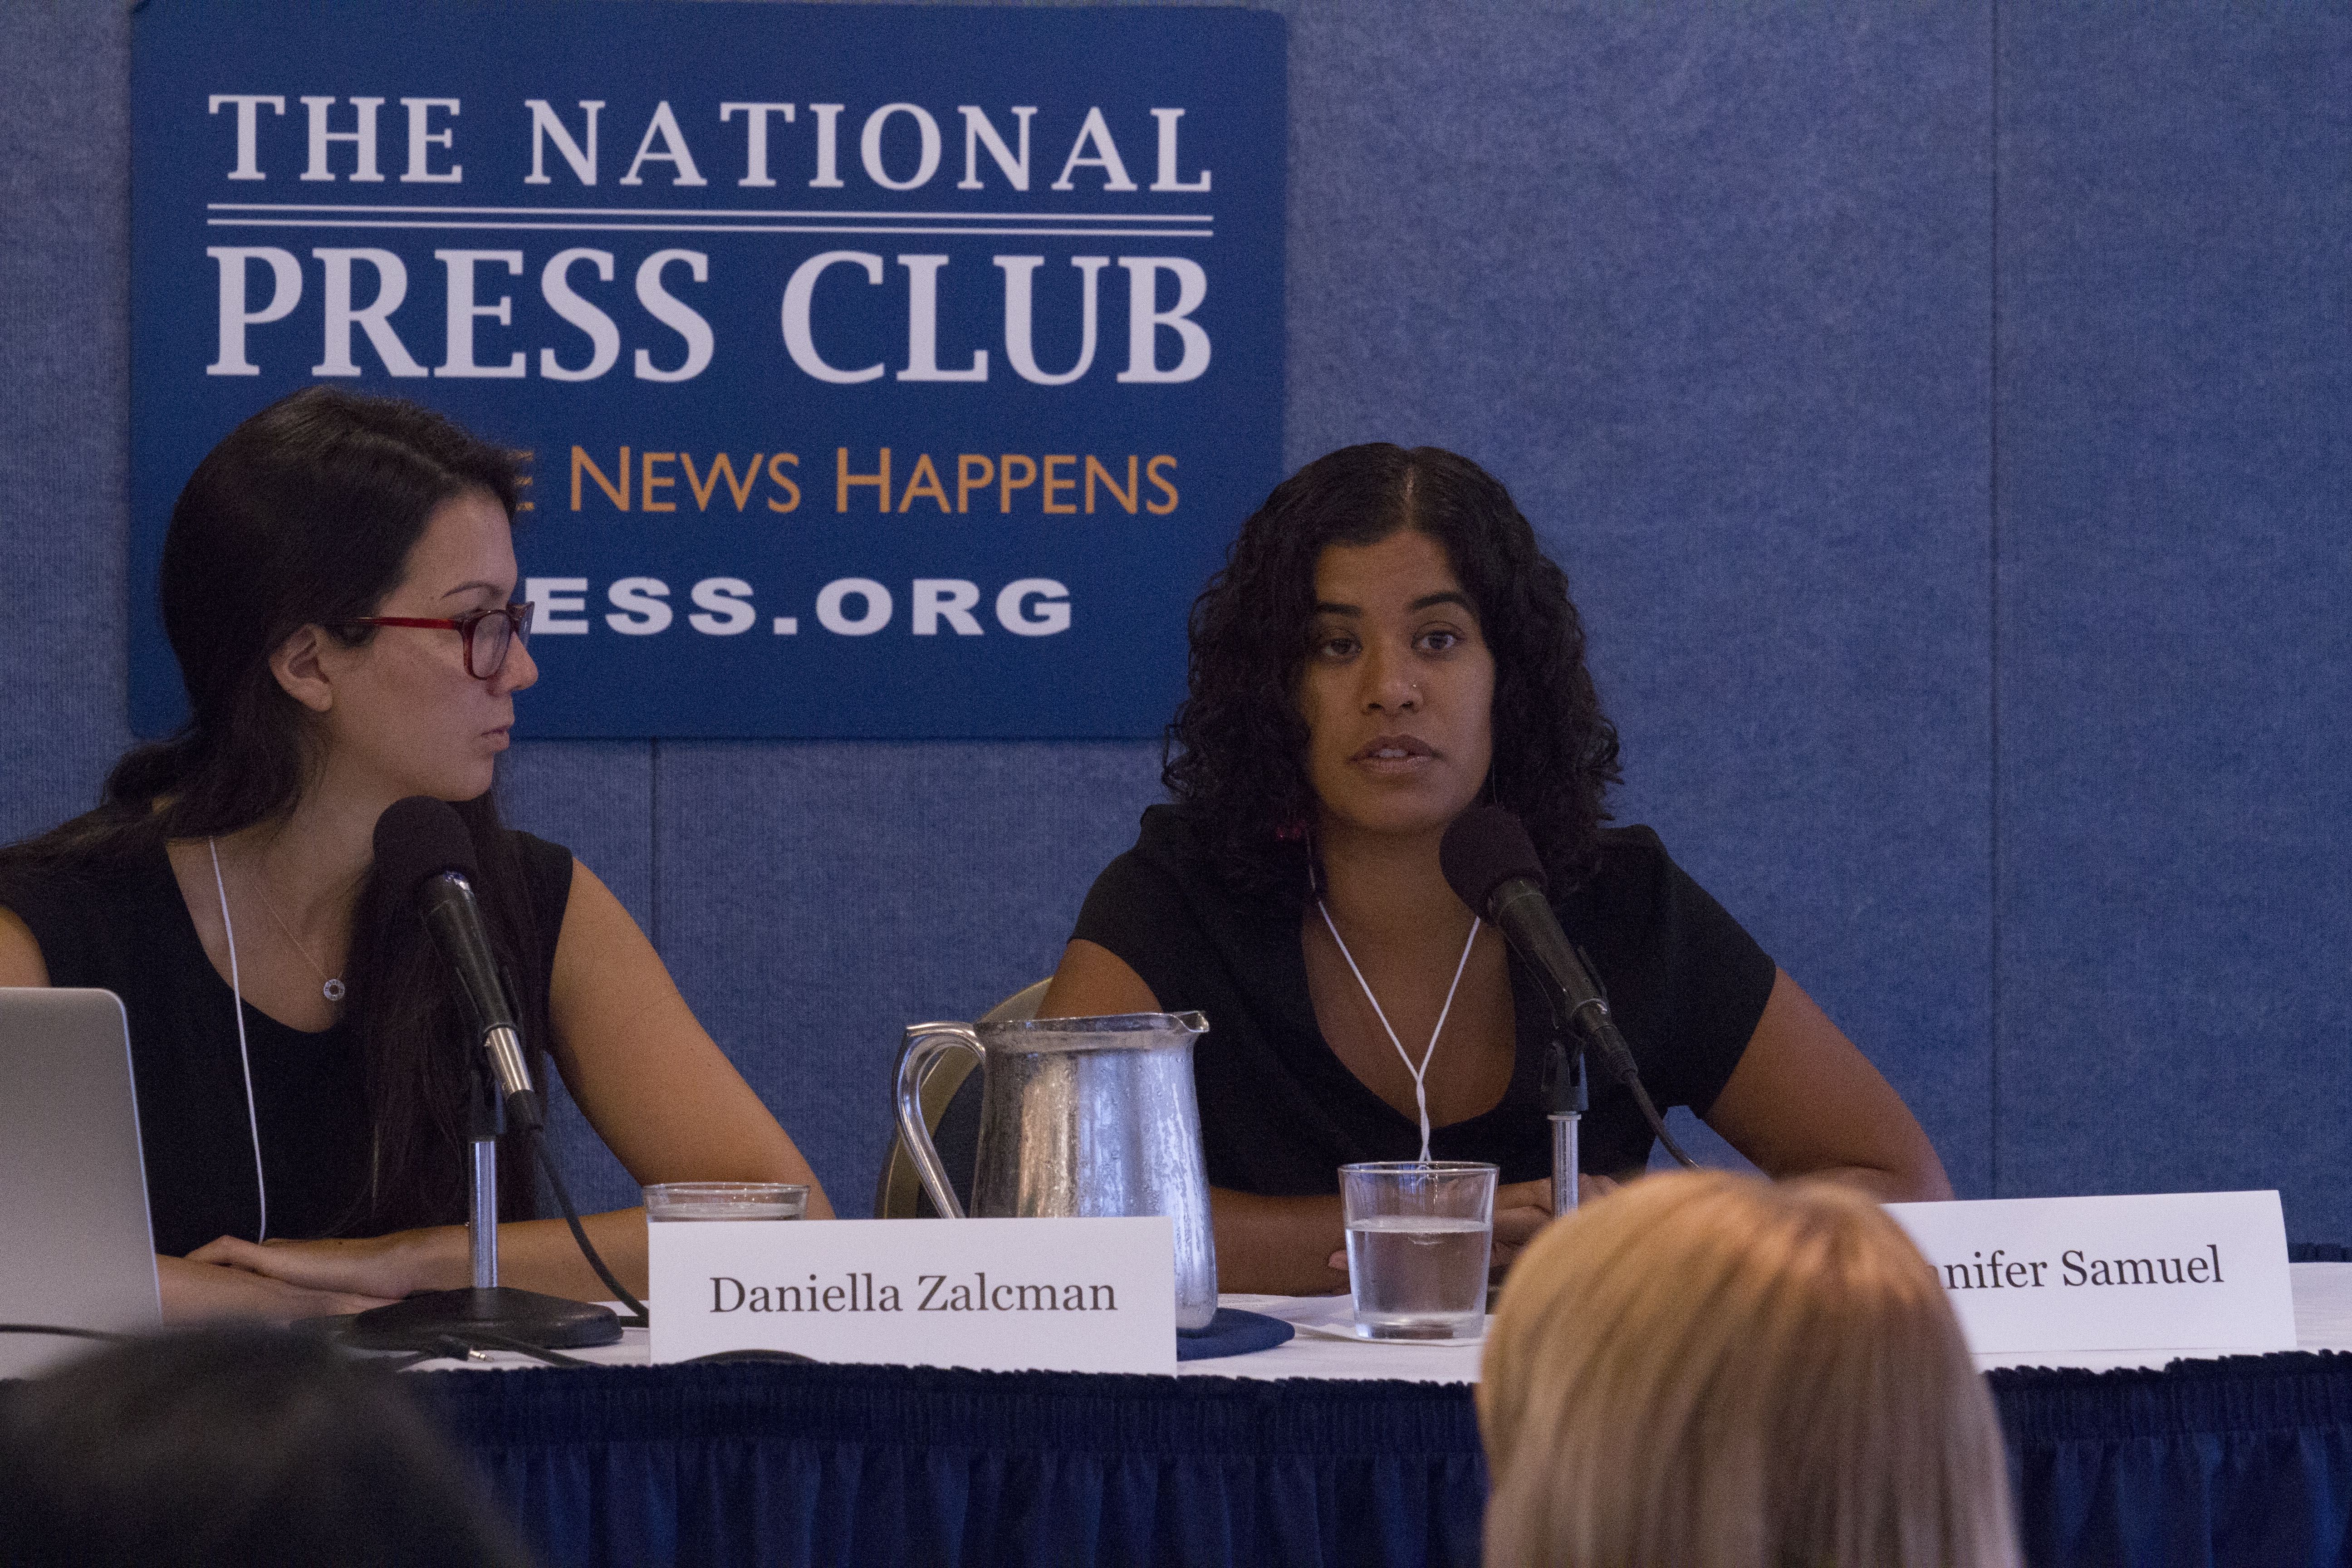 (Left to right) Daniella Zalcman and Jennifer Samuel present databases to help bring women photographers and photographers of color into view for photo editors at international outlets. Image by Jin Ding. United States, 2017.